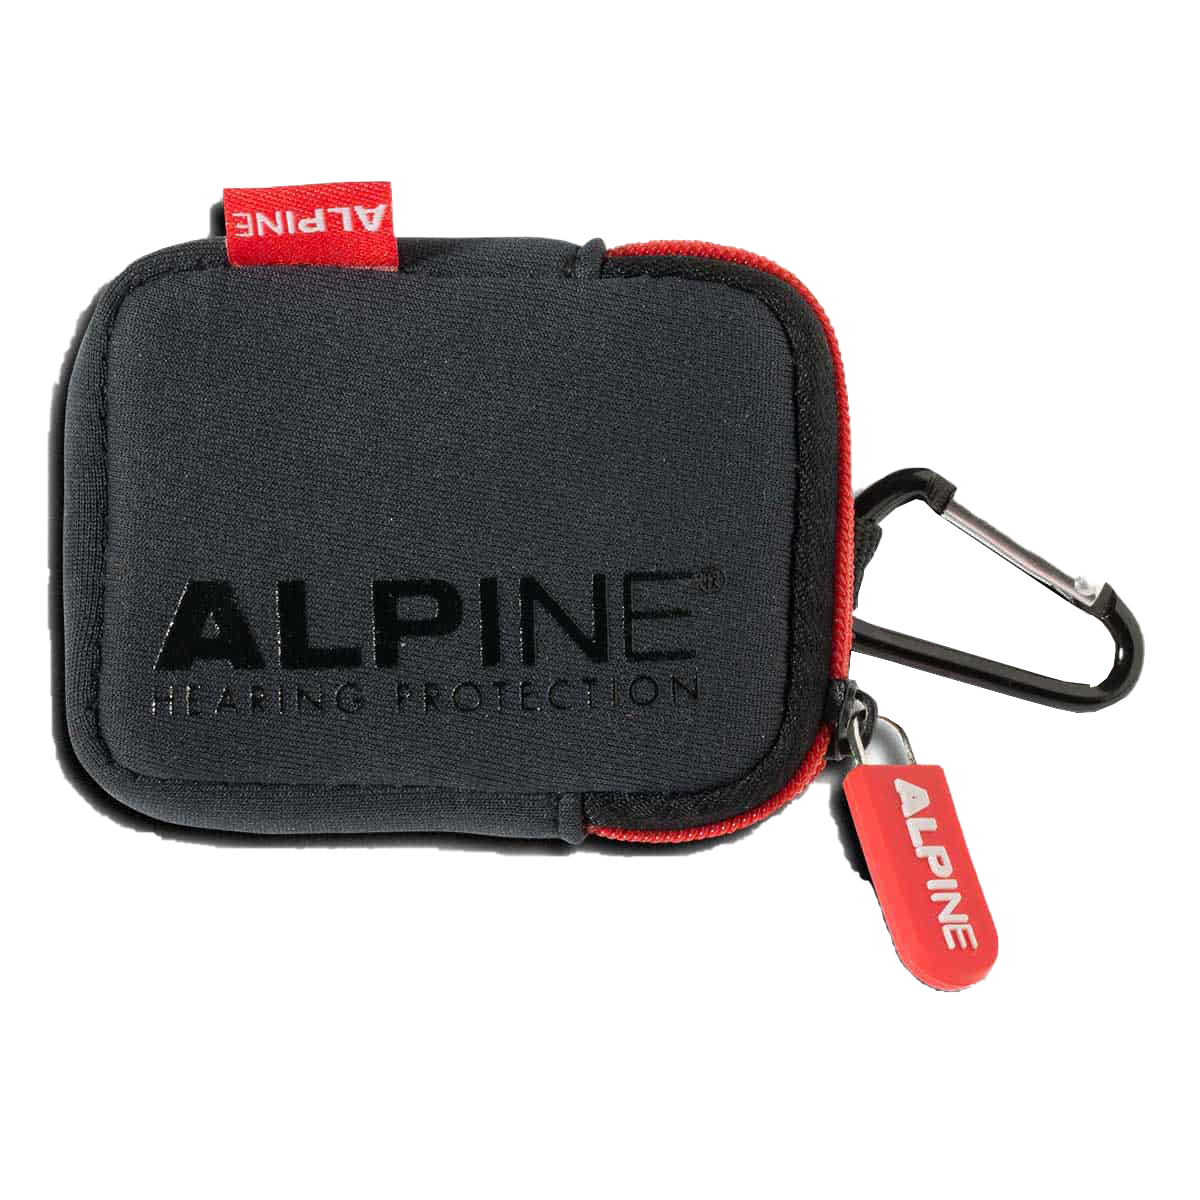 Alpine deluxe pouch for travelling Alpine hearing protection Earplugs earmuffs protect your ear red dot award party sleep motor baby kids music travel race DIY swim accessories project industry 